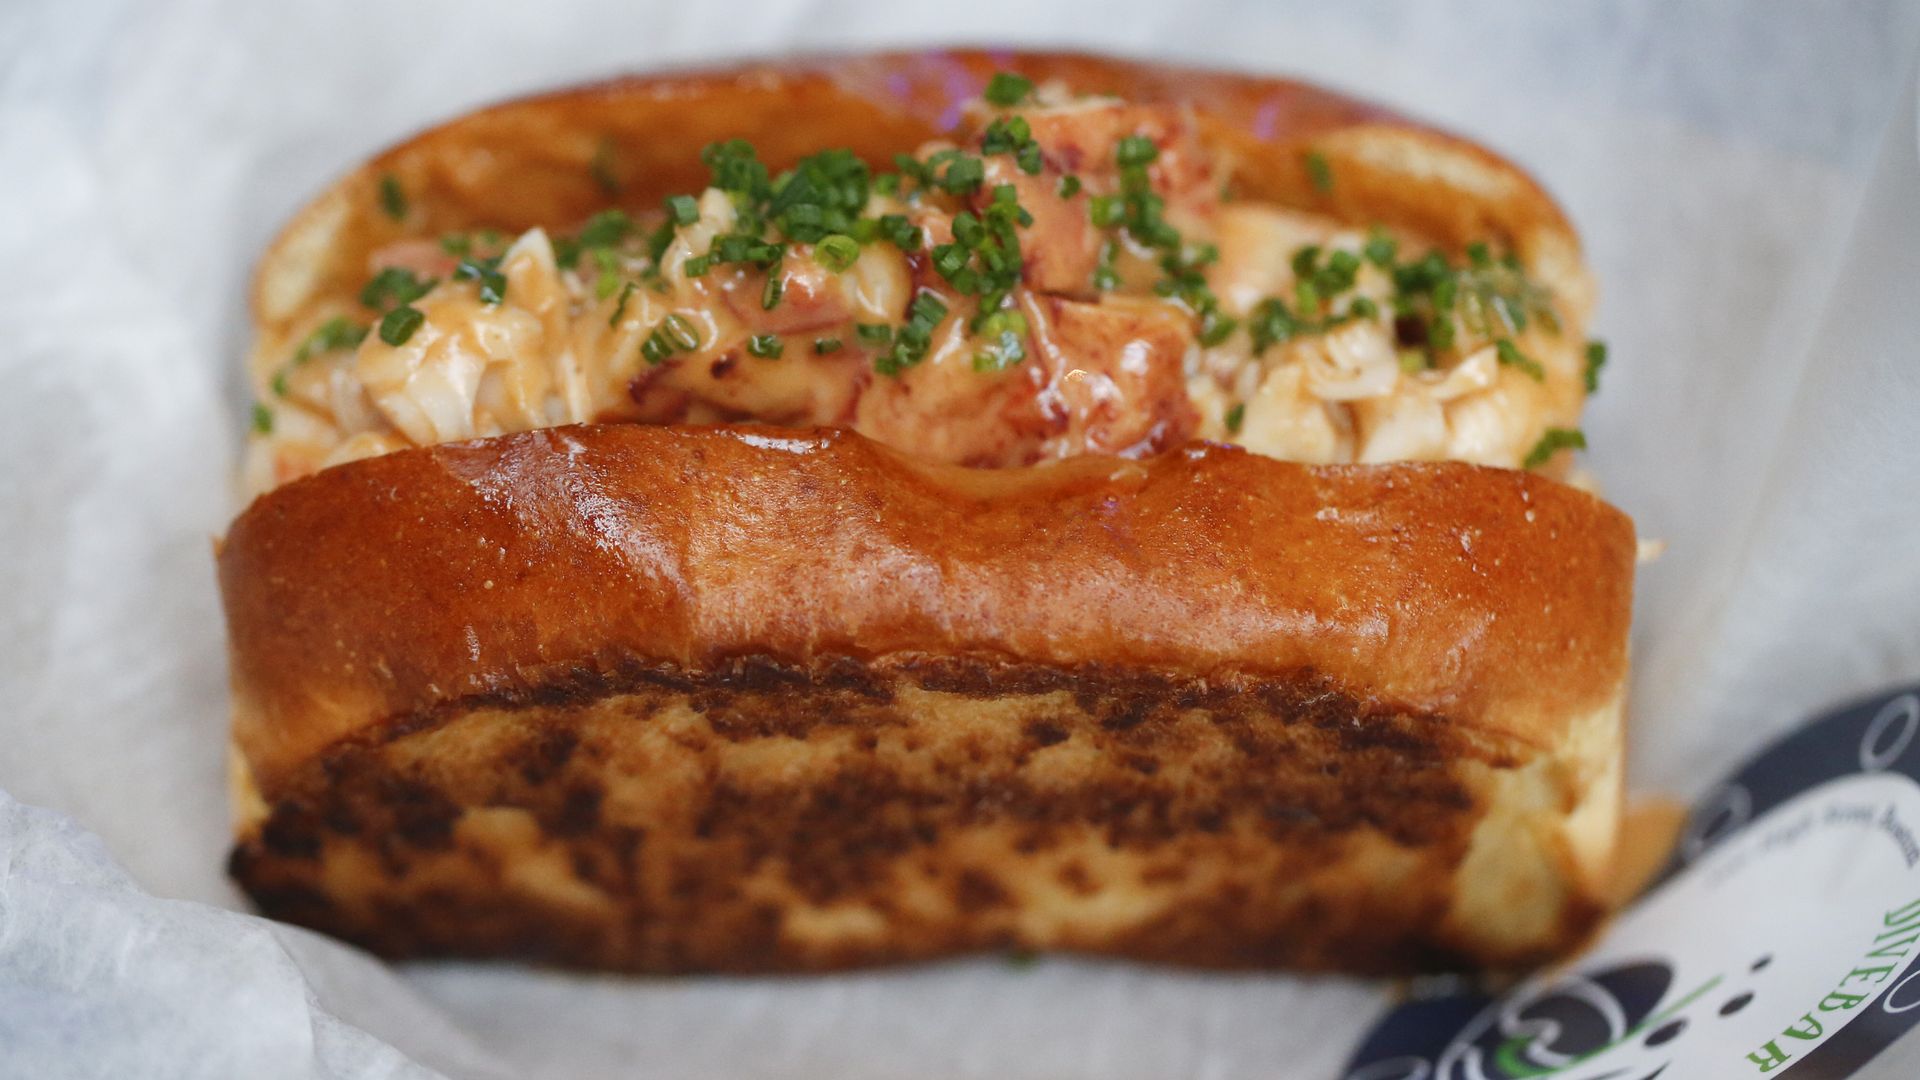 A lobster roll